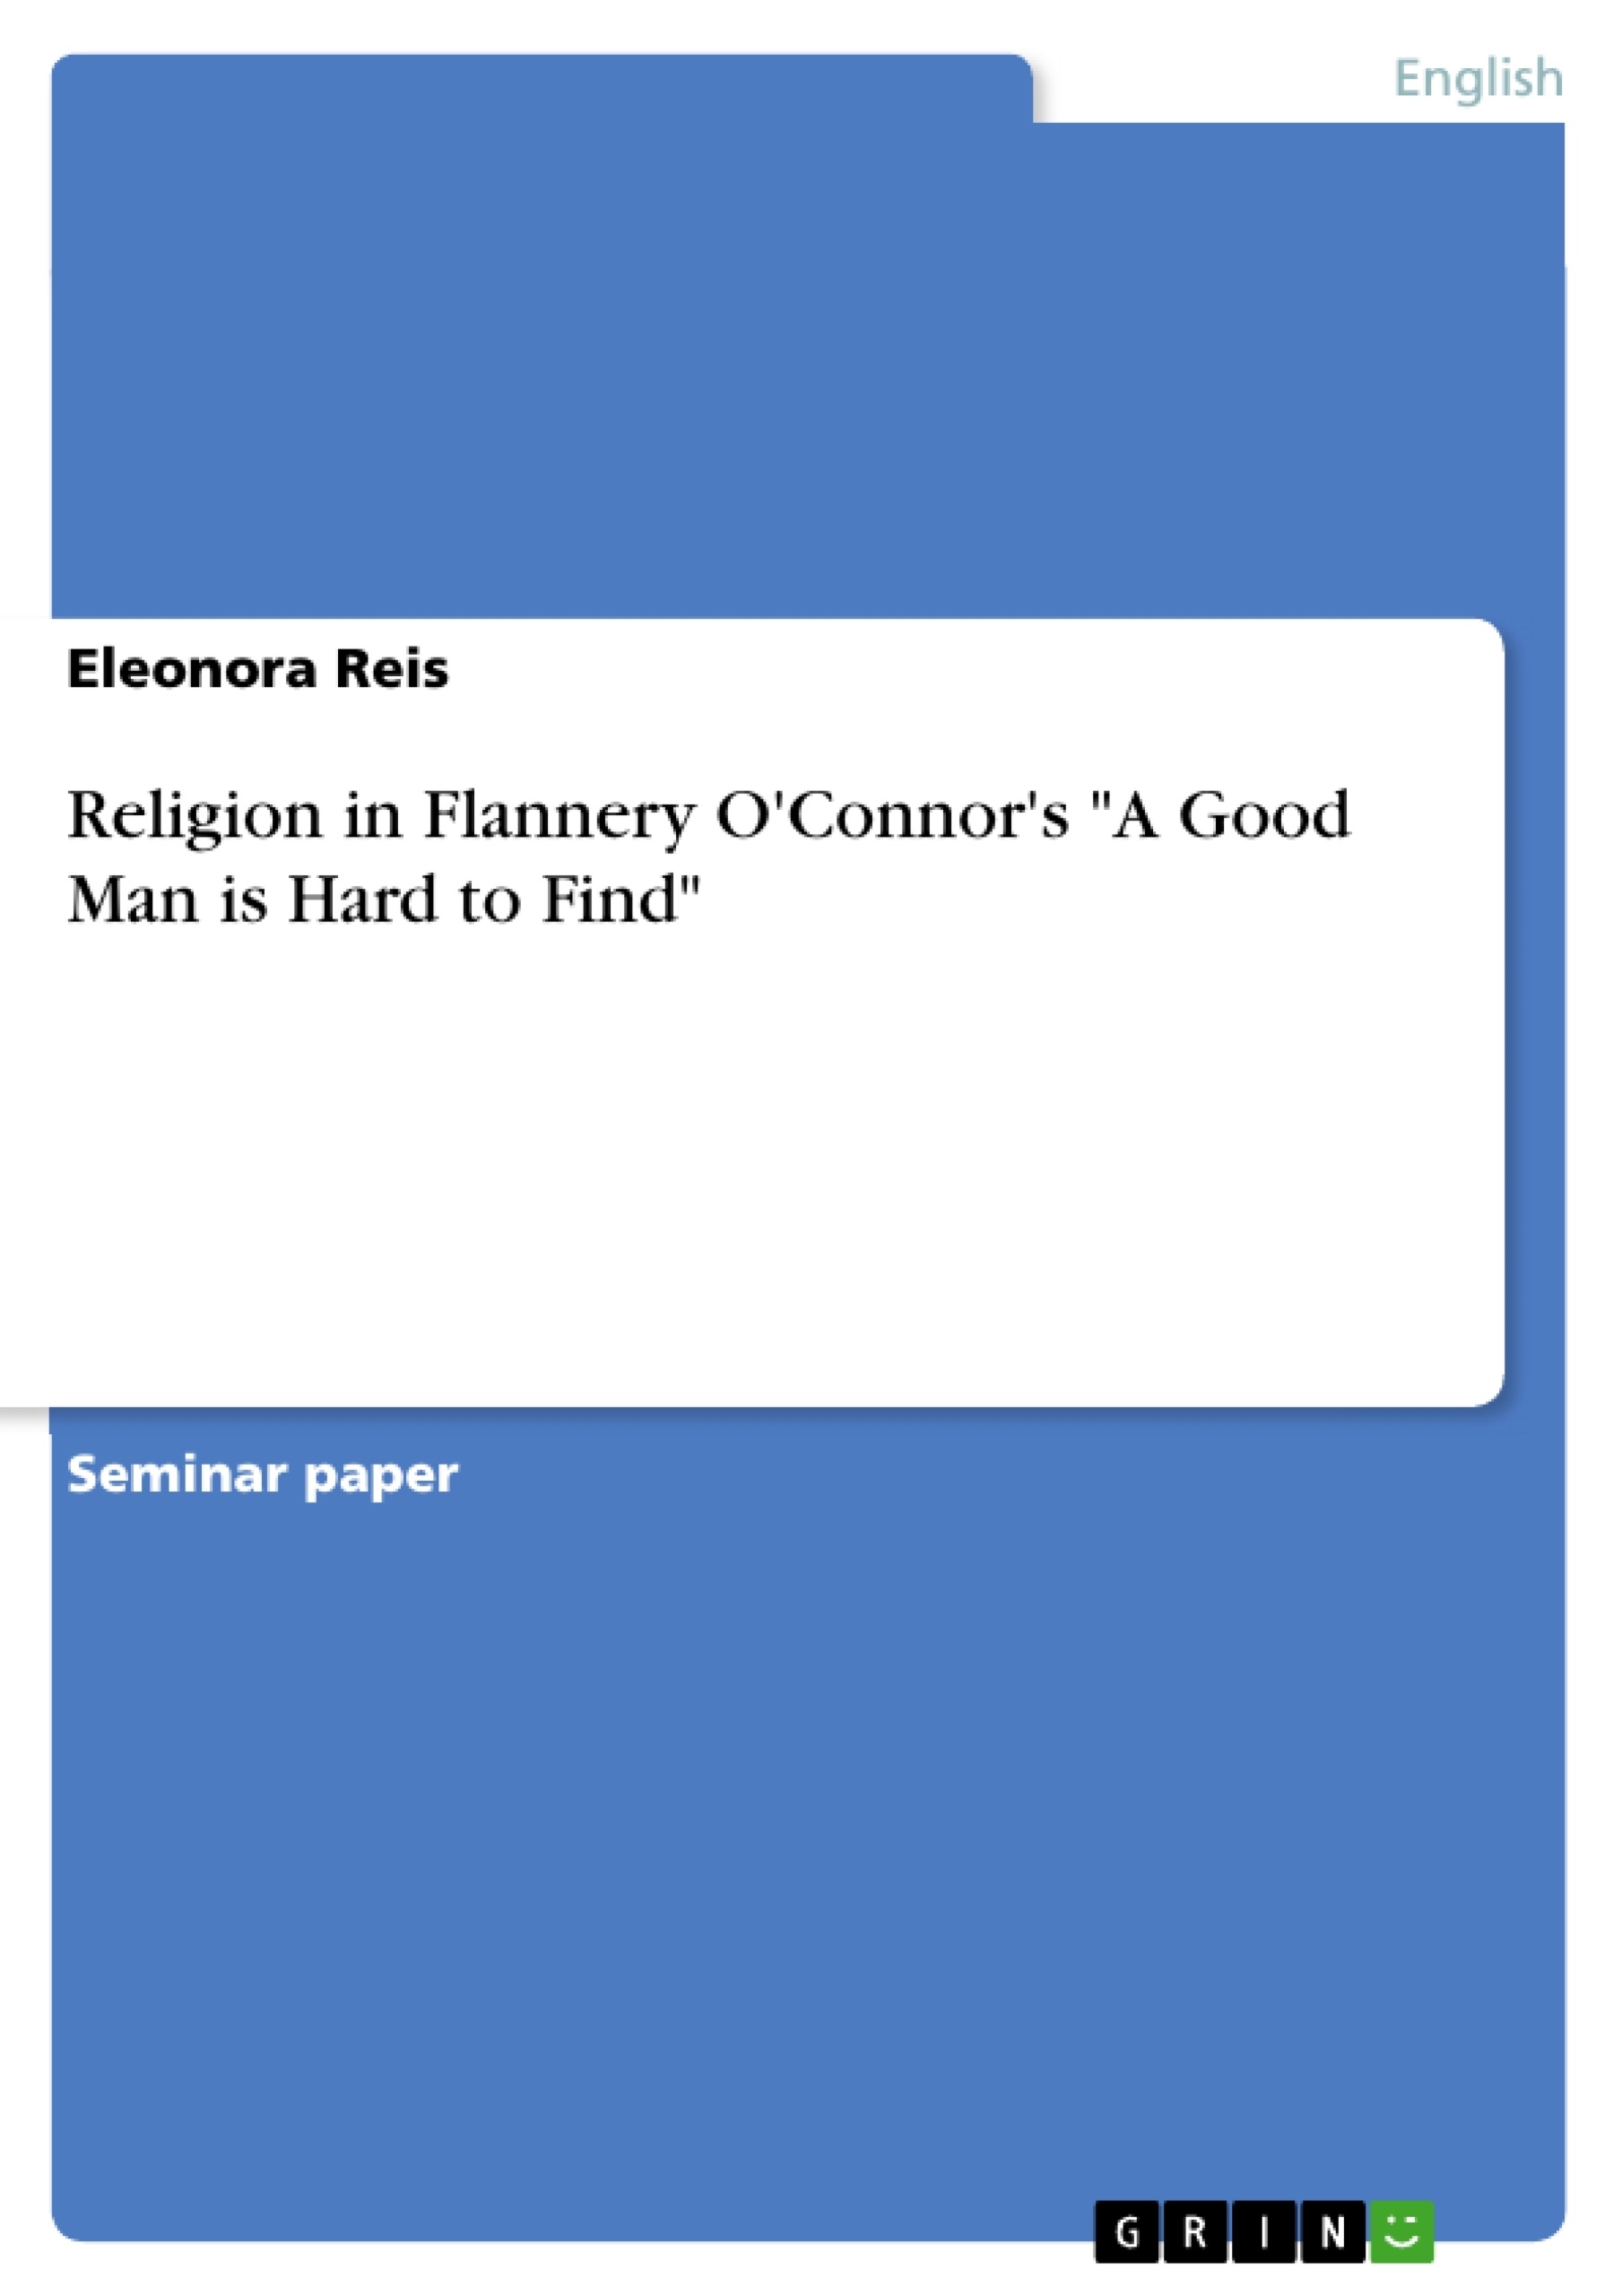 Title: Religion in Flannery O'Connor's "A Good Man is Hard to Find"